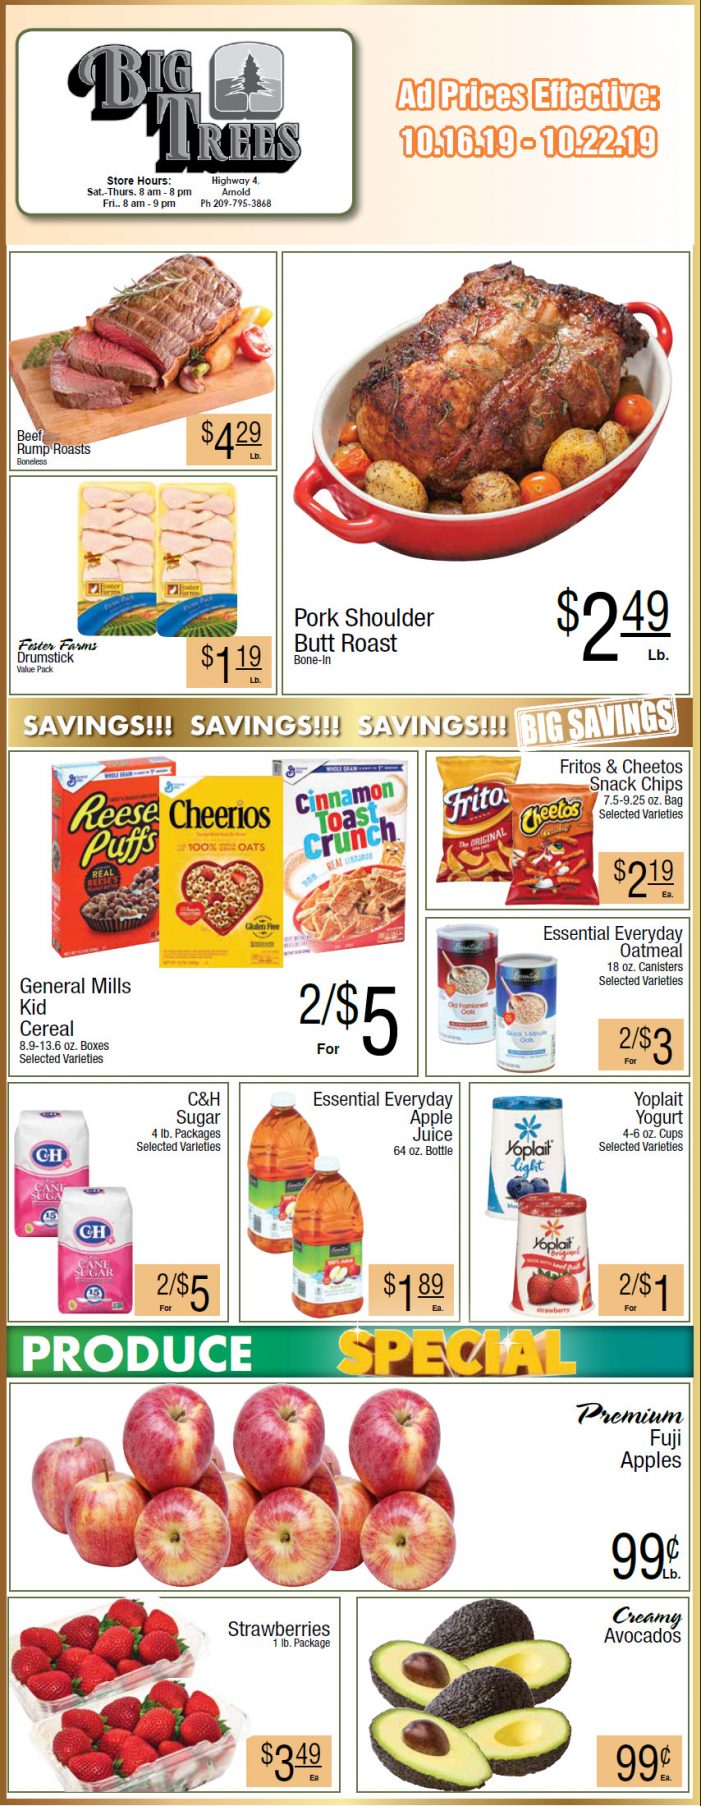 Big Trees Market Weekly Ad & Grocery Specials Through October 22nd